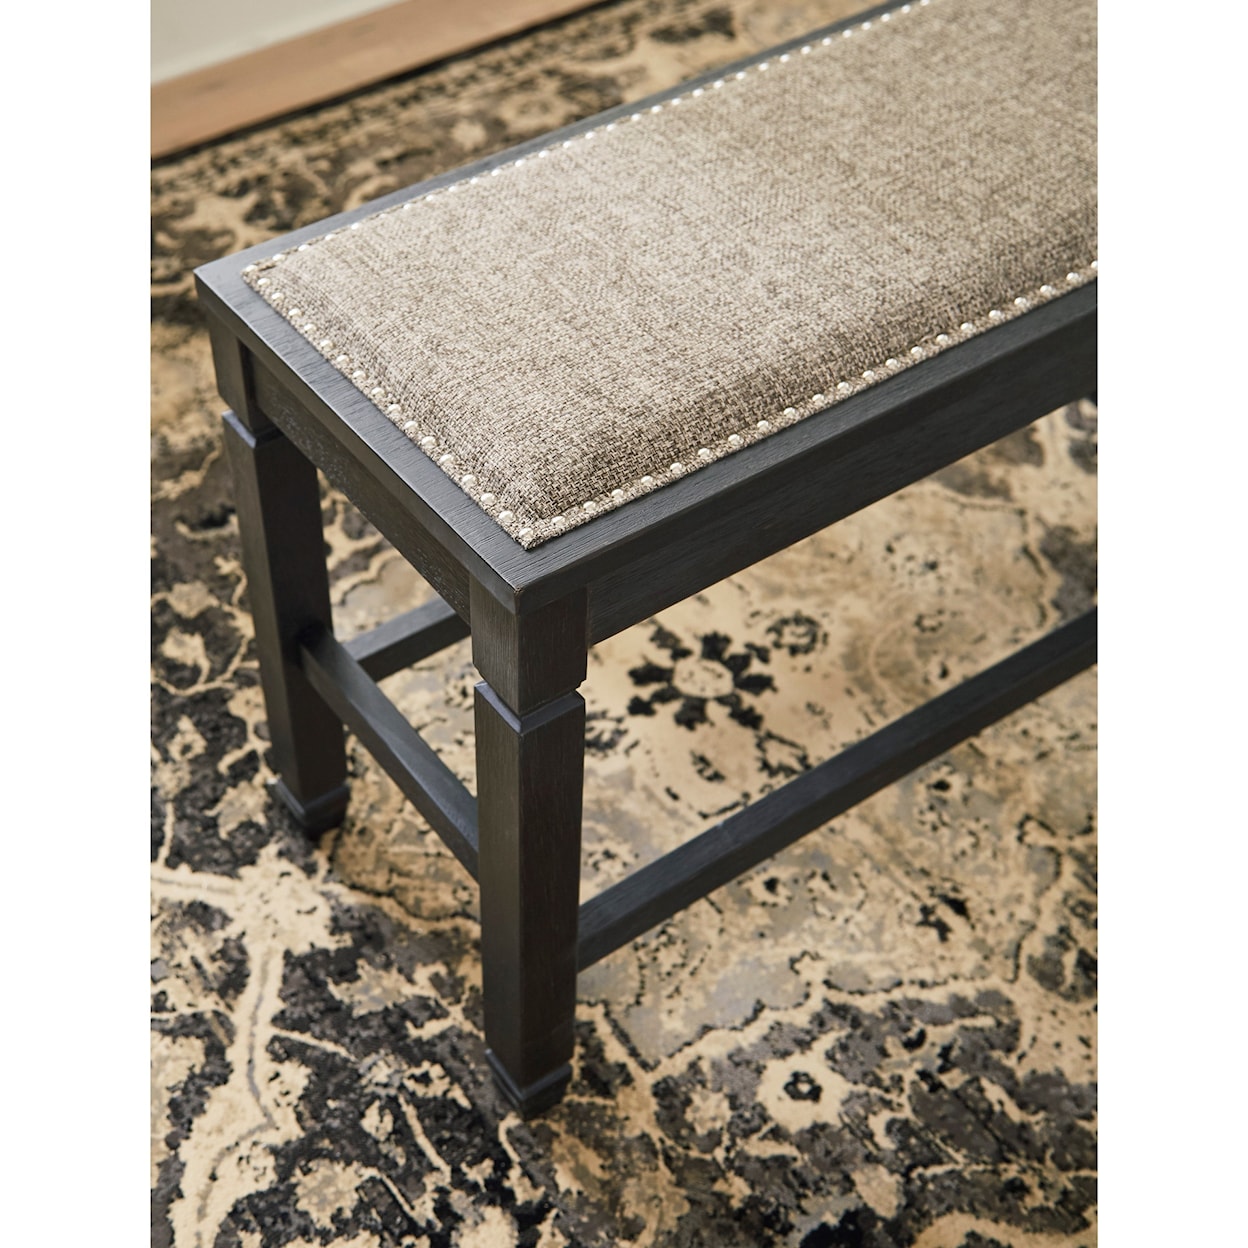 Signature Tyler Creek Double Counter Upholstered Bench